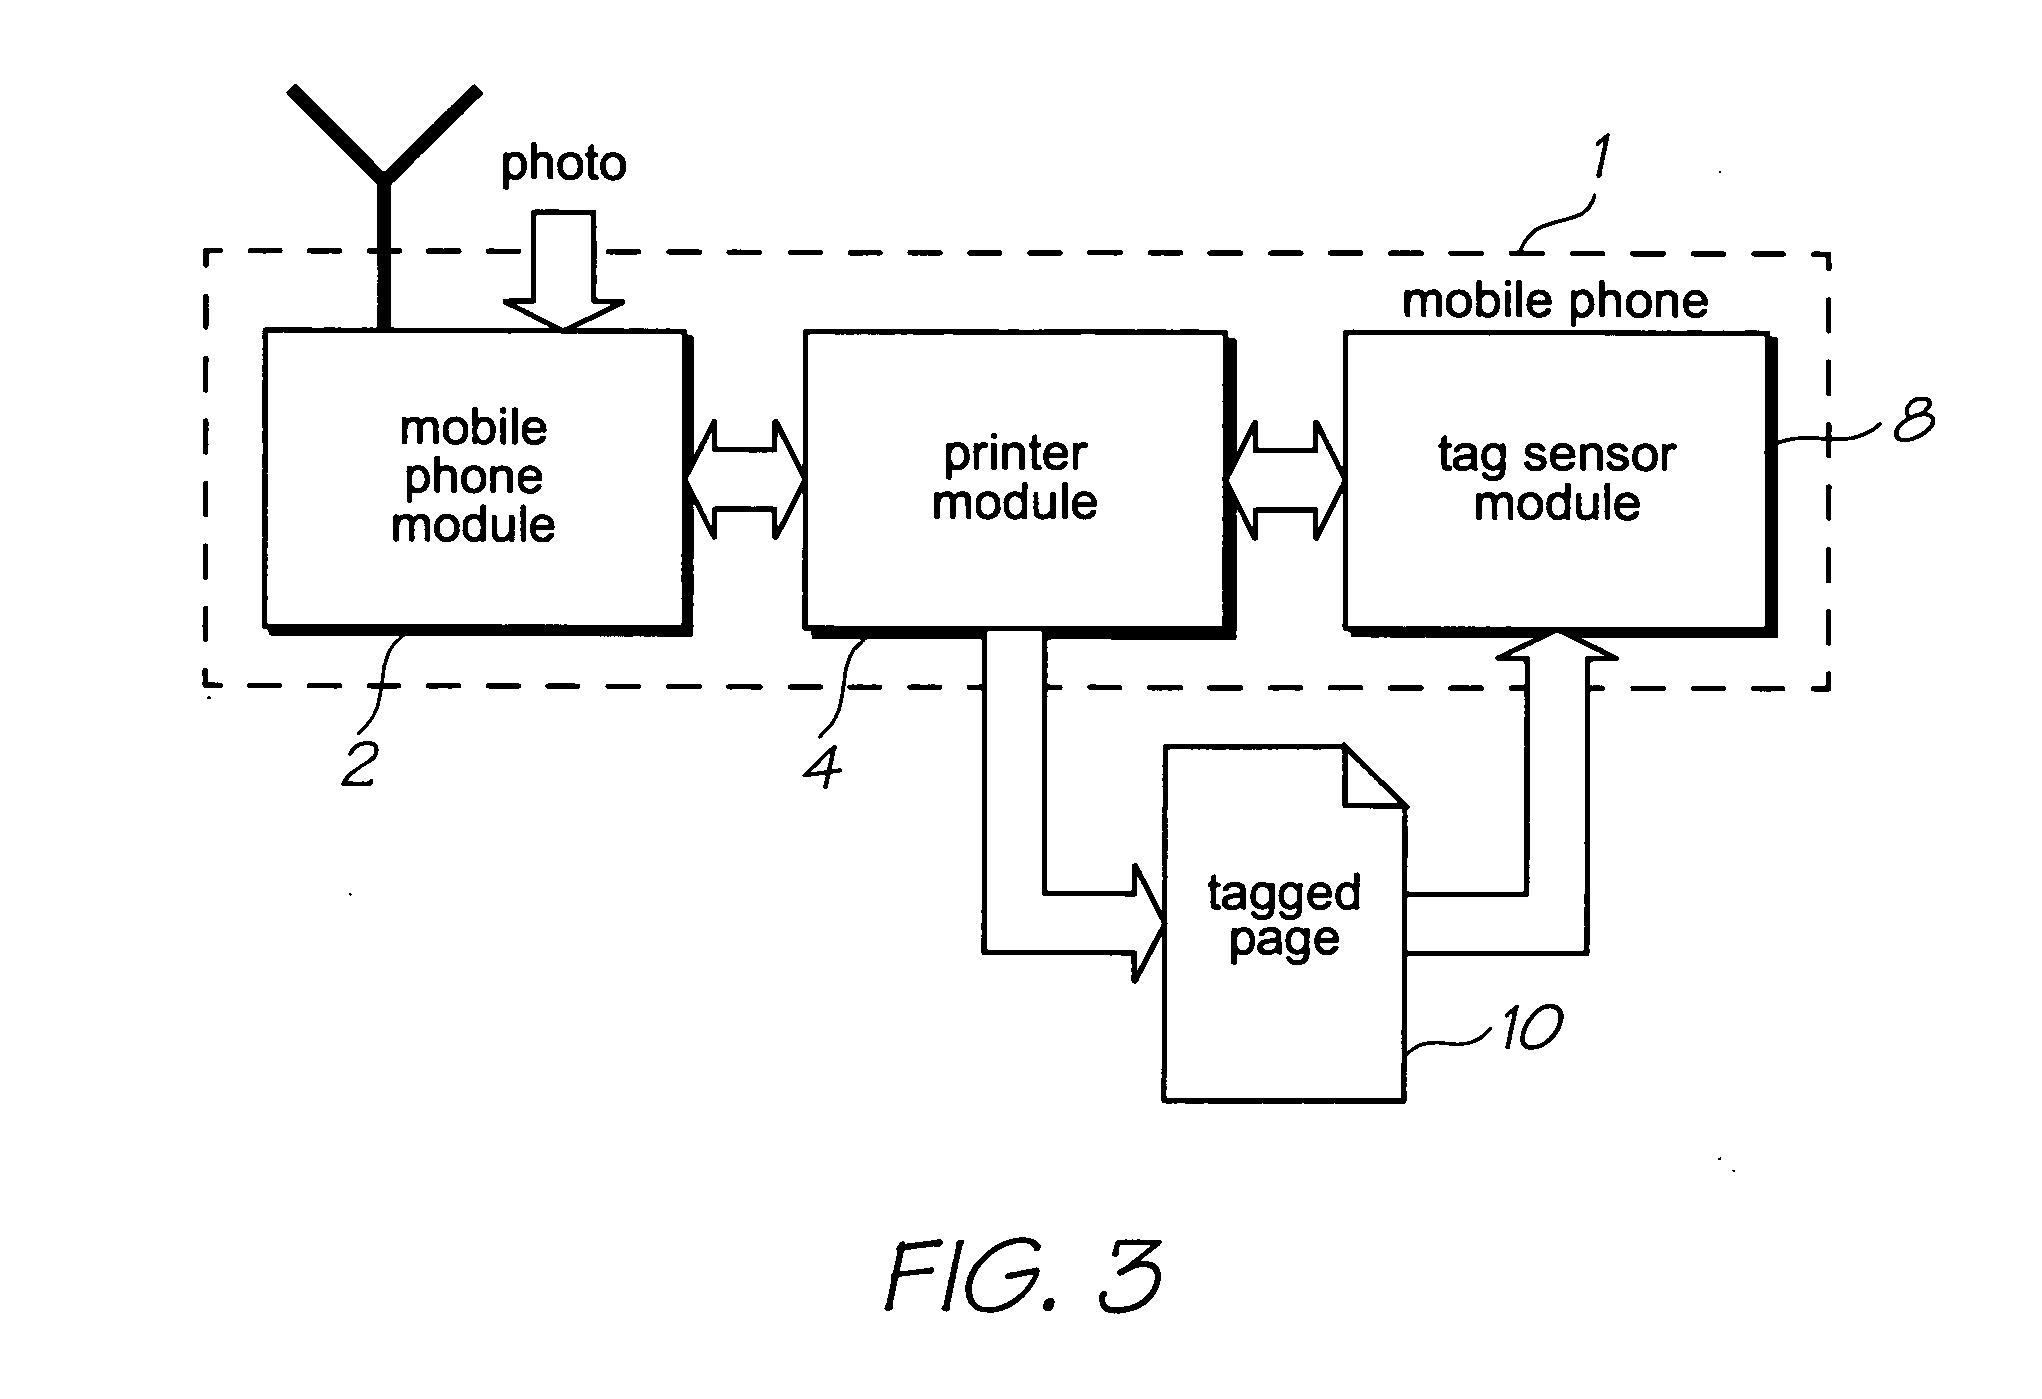 Method of using a mobile device to authenticate a printed token and output an image associated with the token